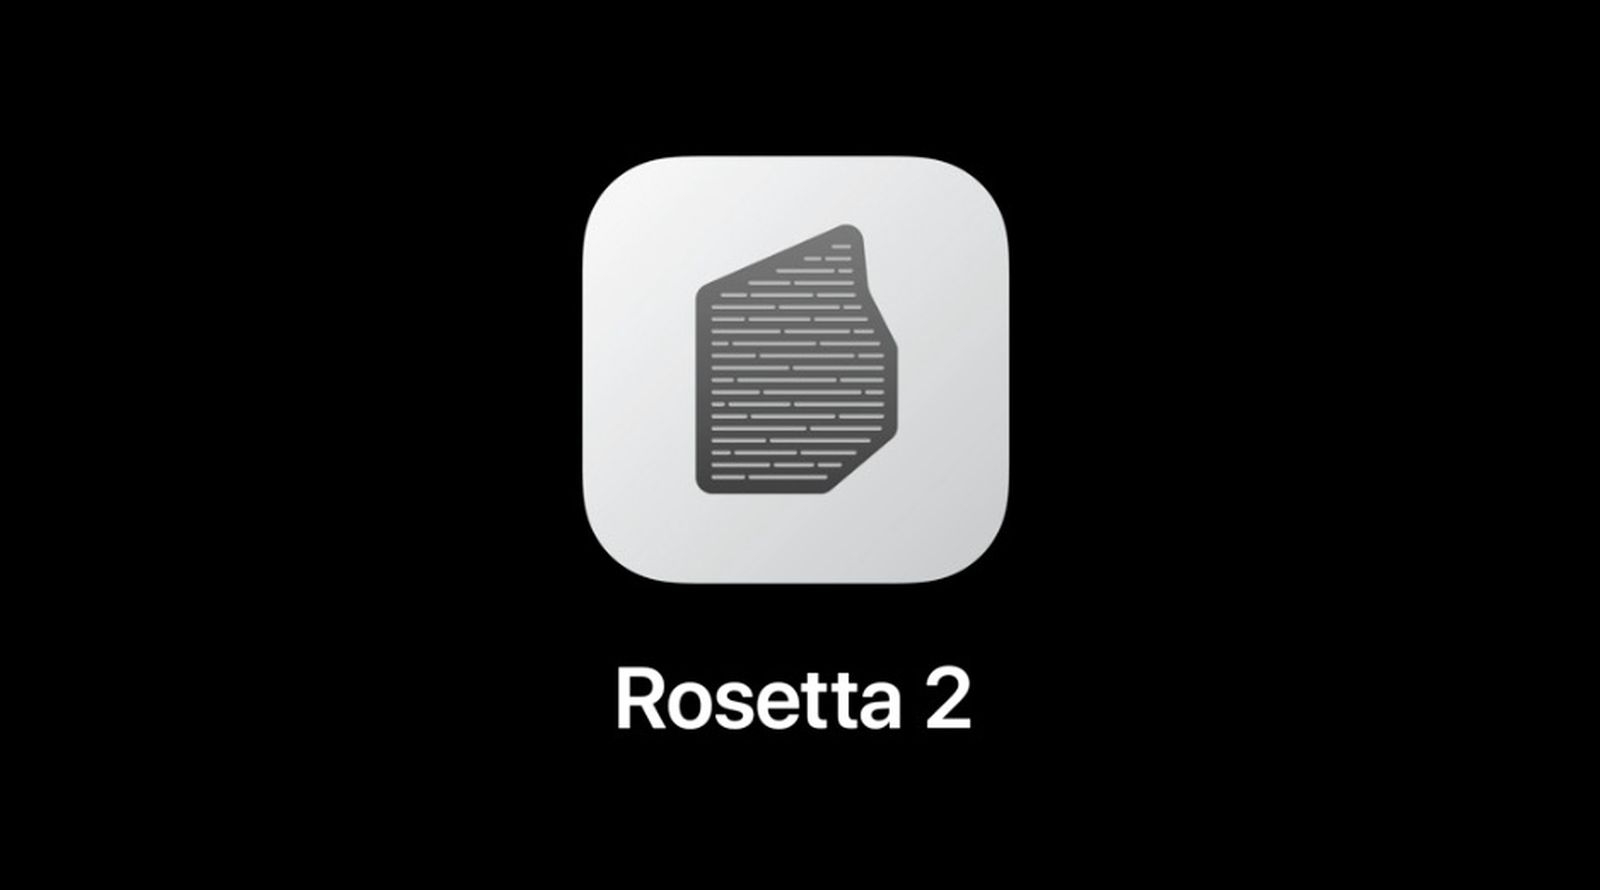 Rosetta can be removed from M1 Macs in some regions on MacOS 11.3